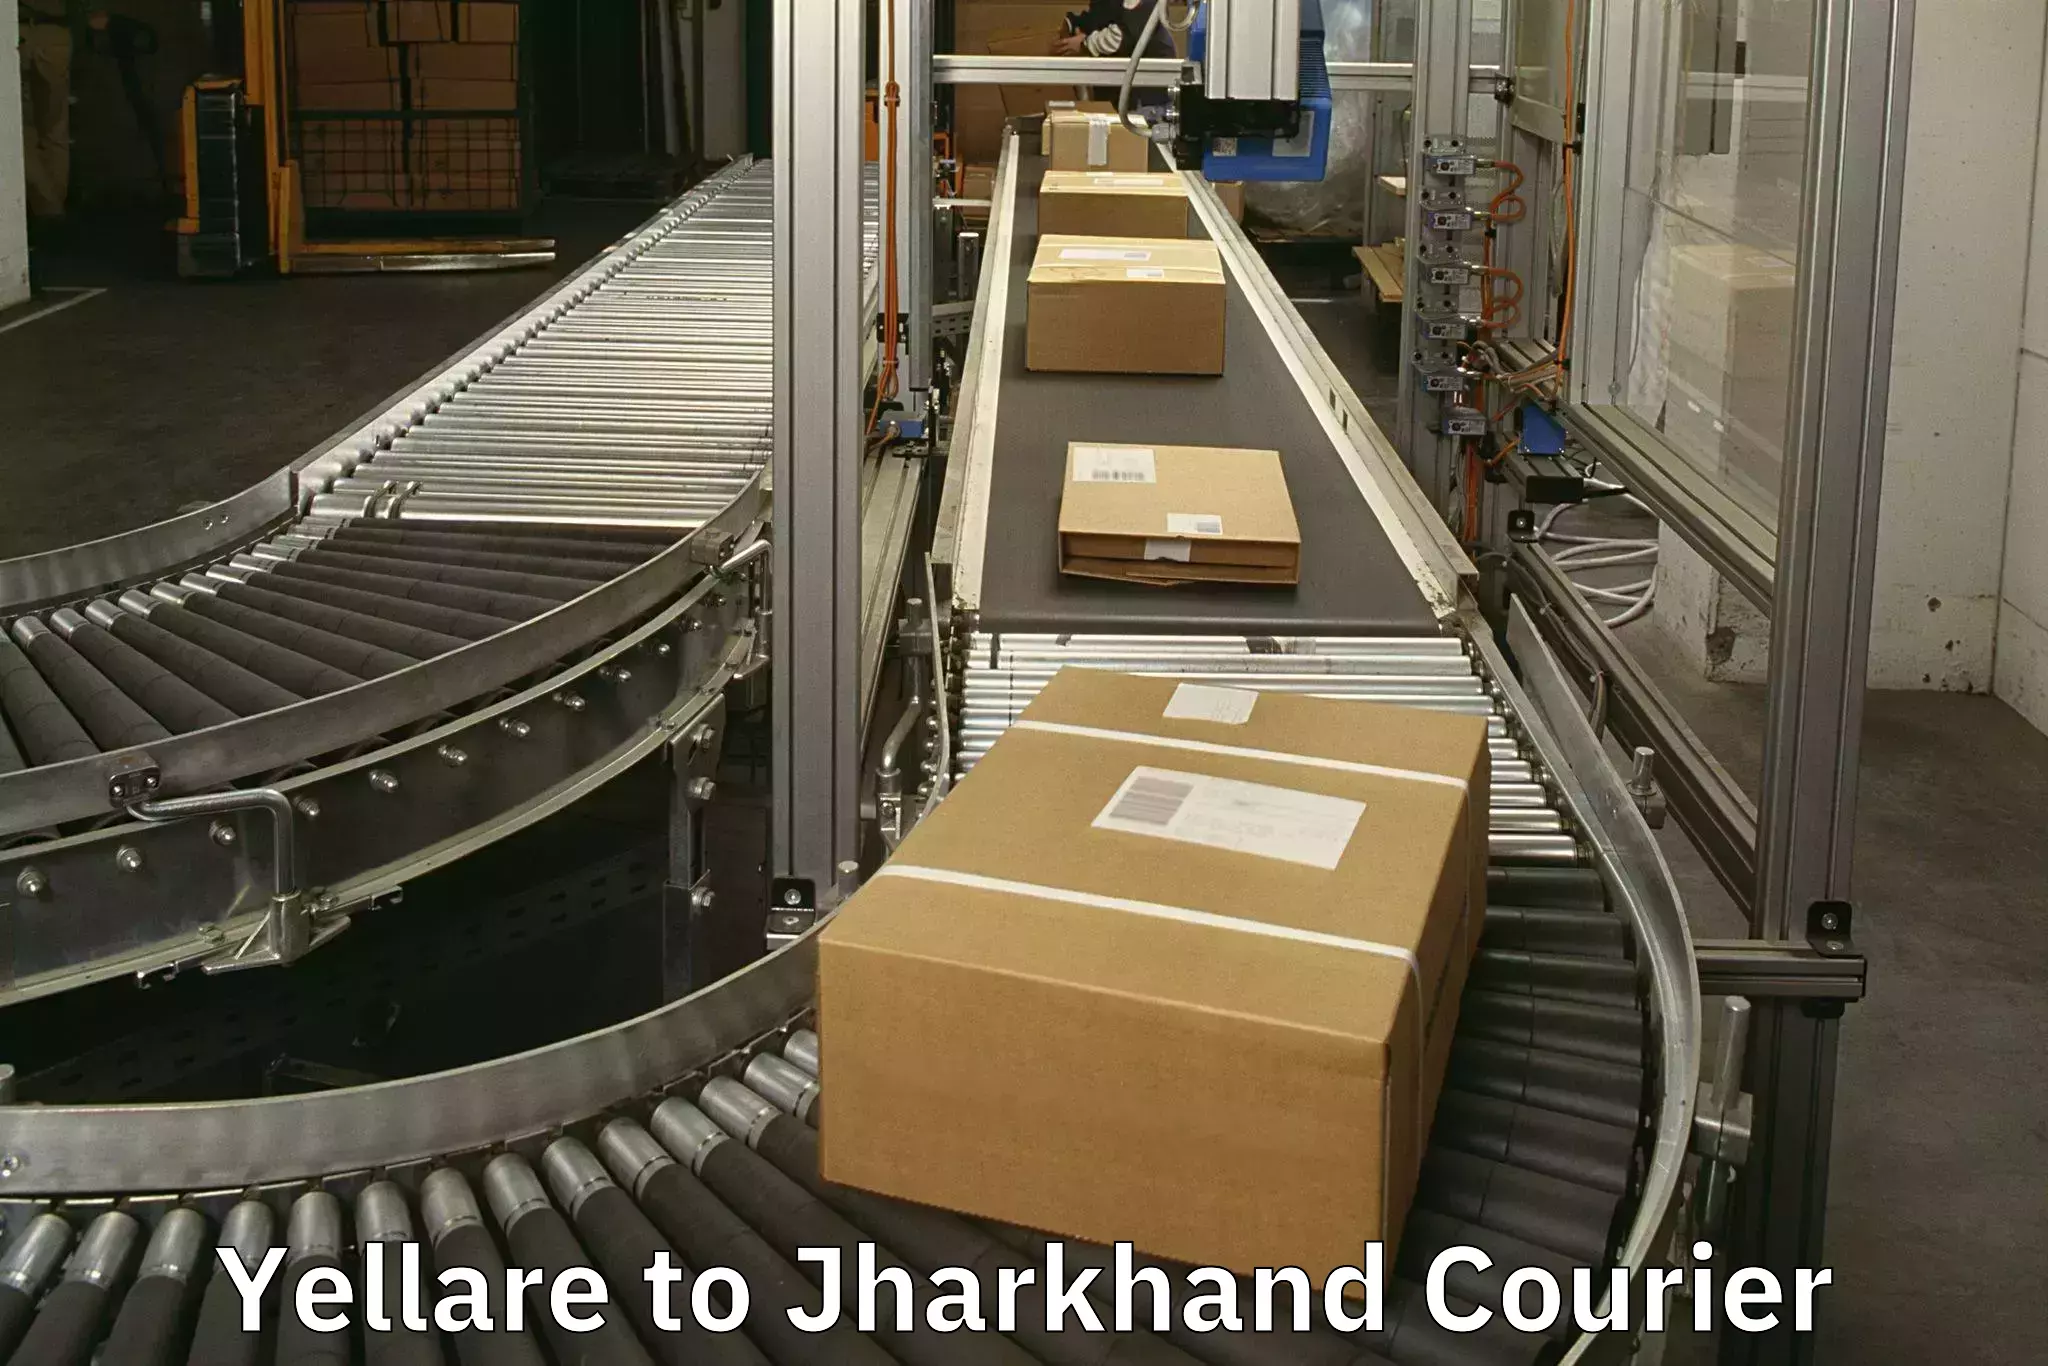 Instant baggage transport quote Yellare to Jharkhand